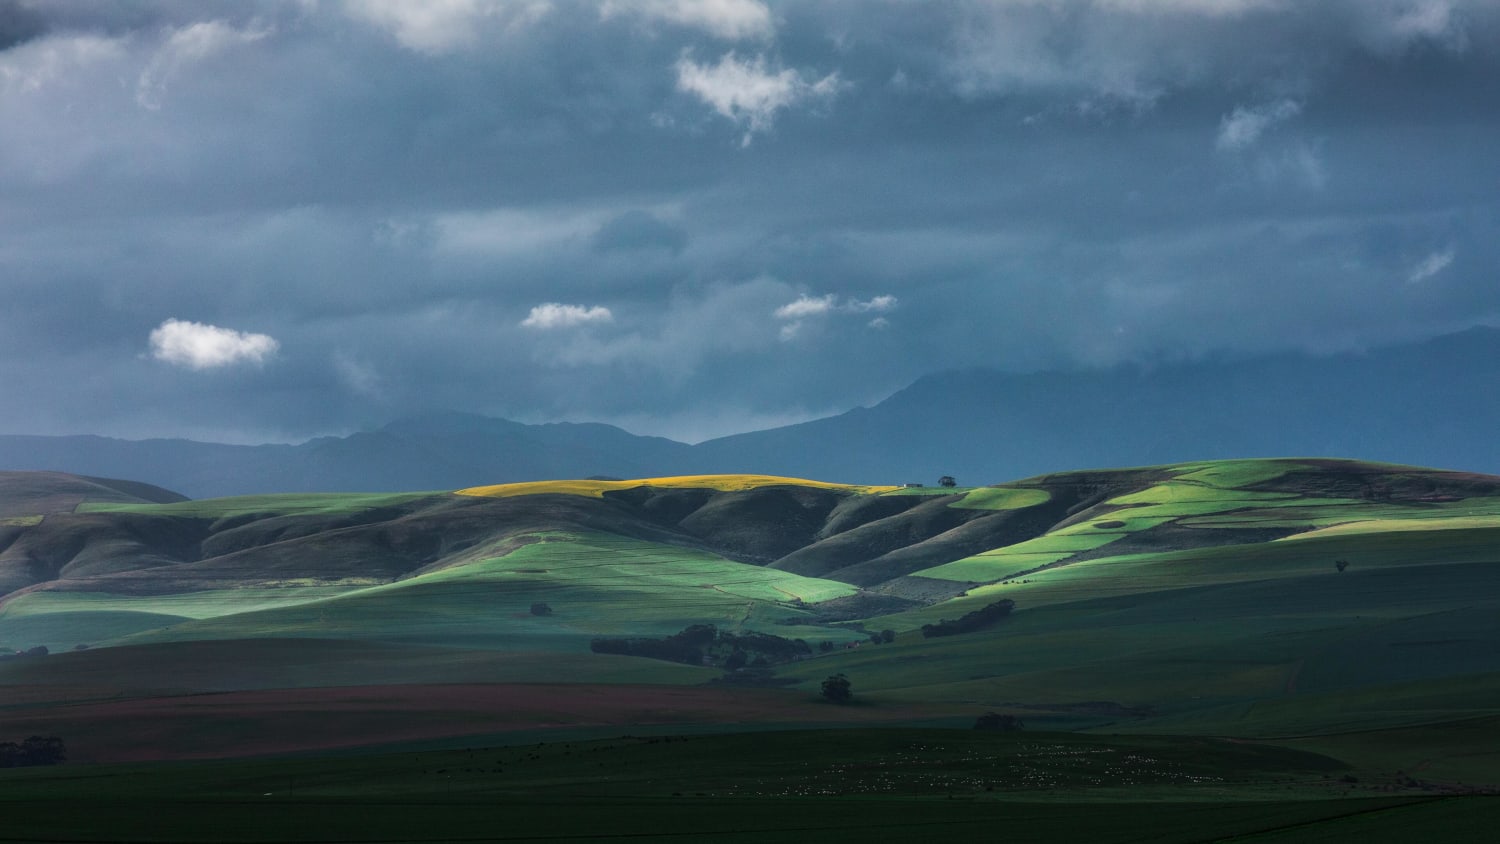 Caledon South Africa (Photo credit to Charl Folscher)